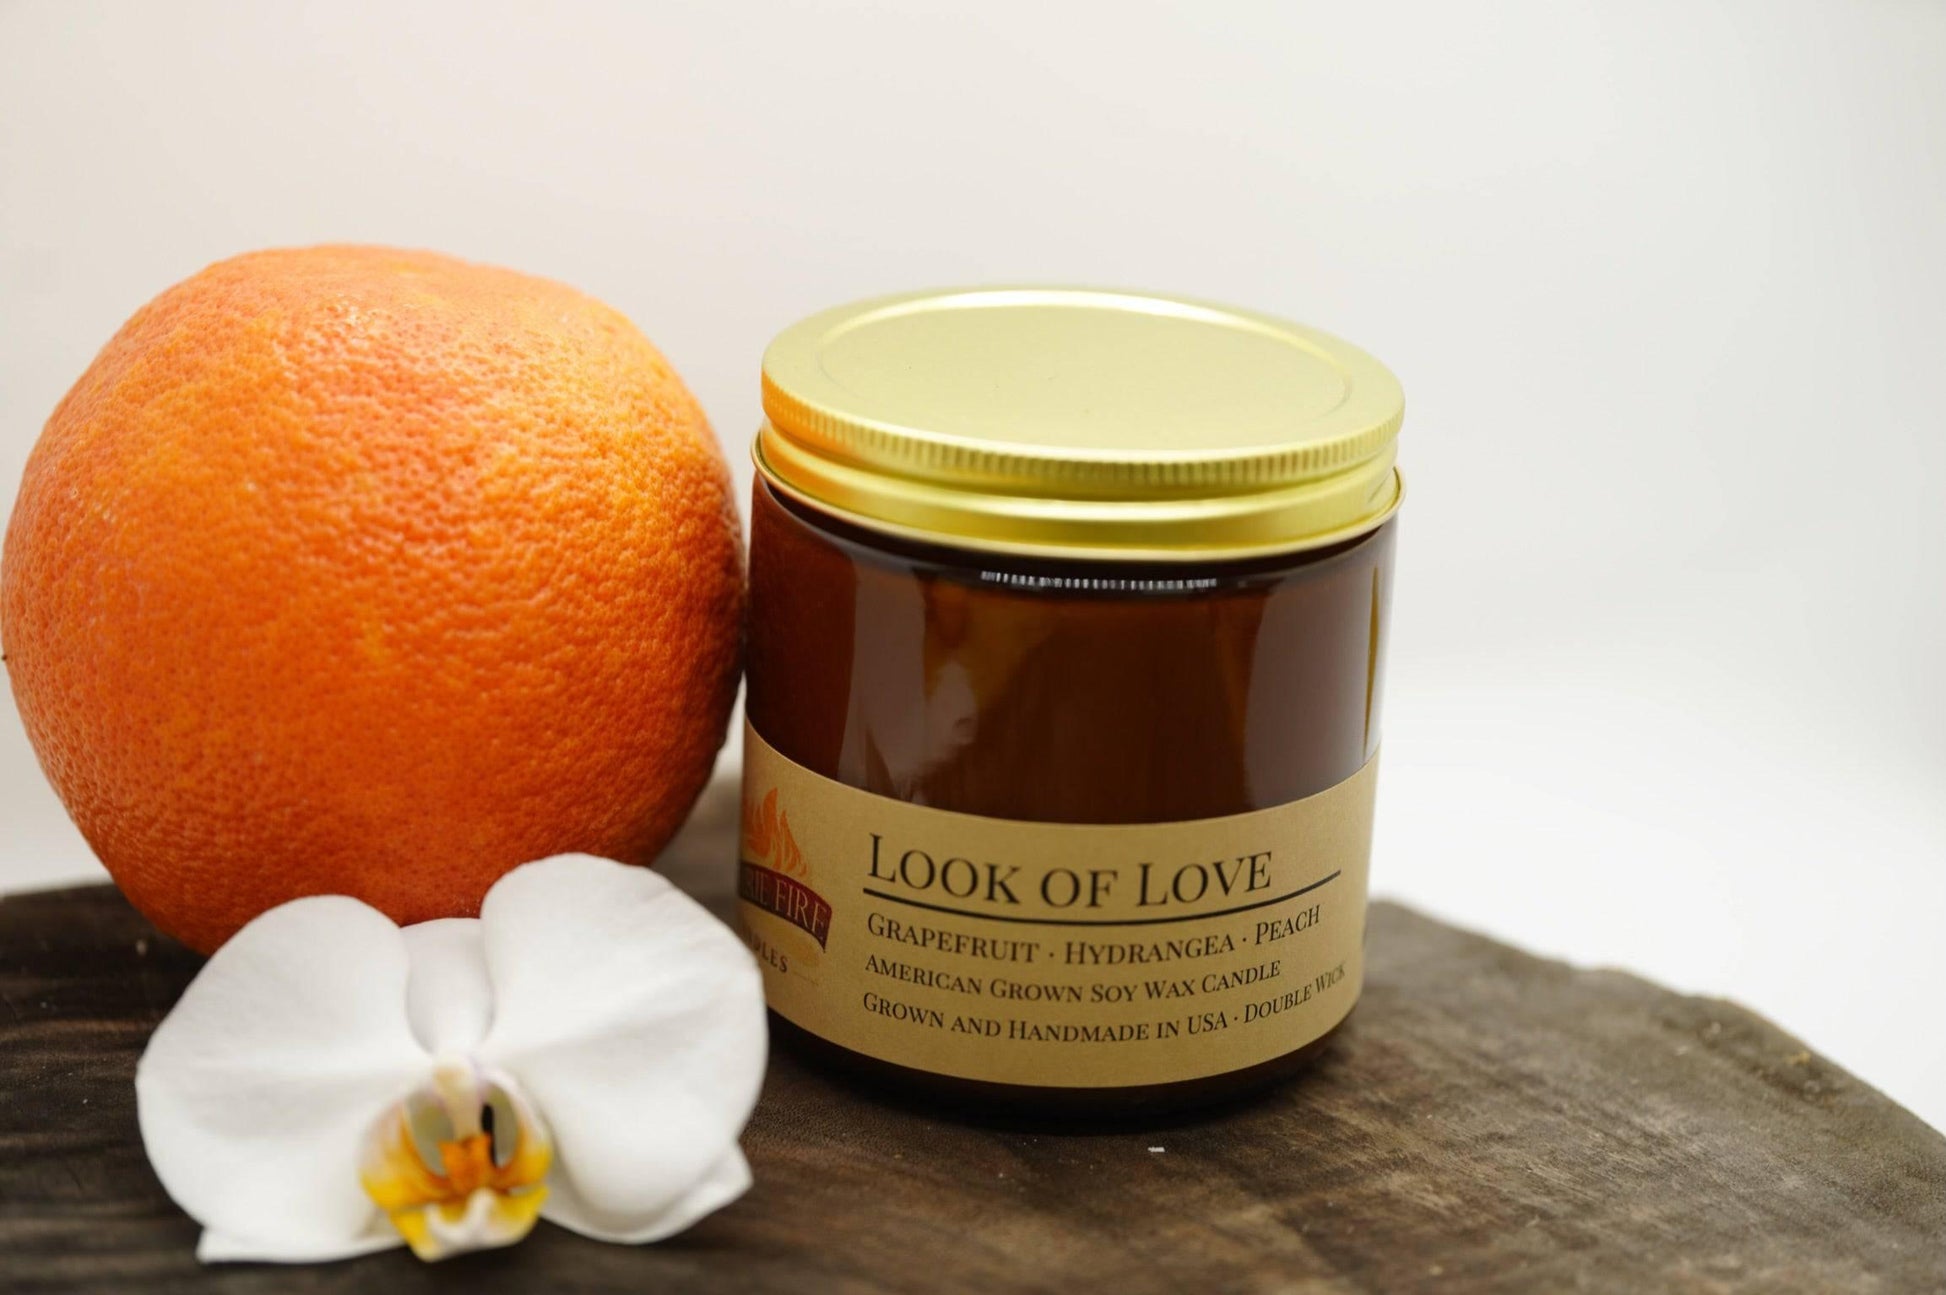 Look of Love Soy Wax Candle | 16 oz Double Wick Amber Apothecary Jar - Prairie Fire Candles